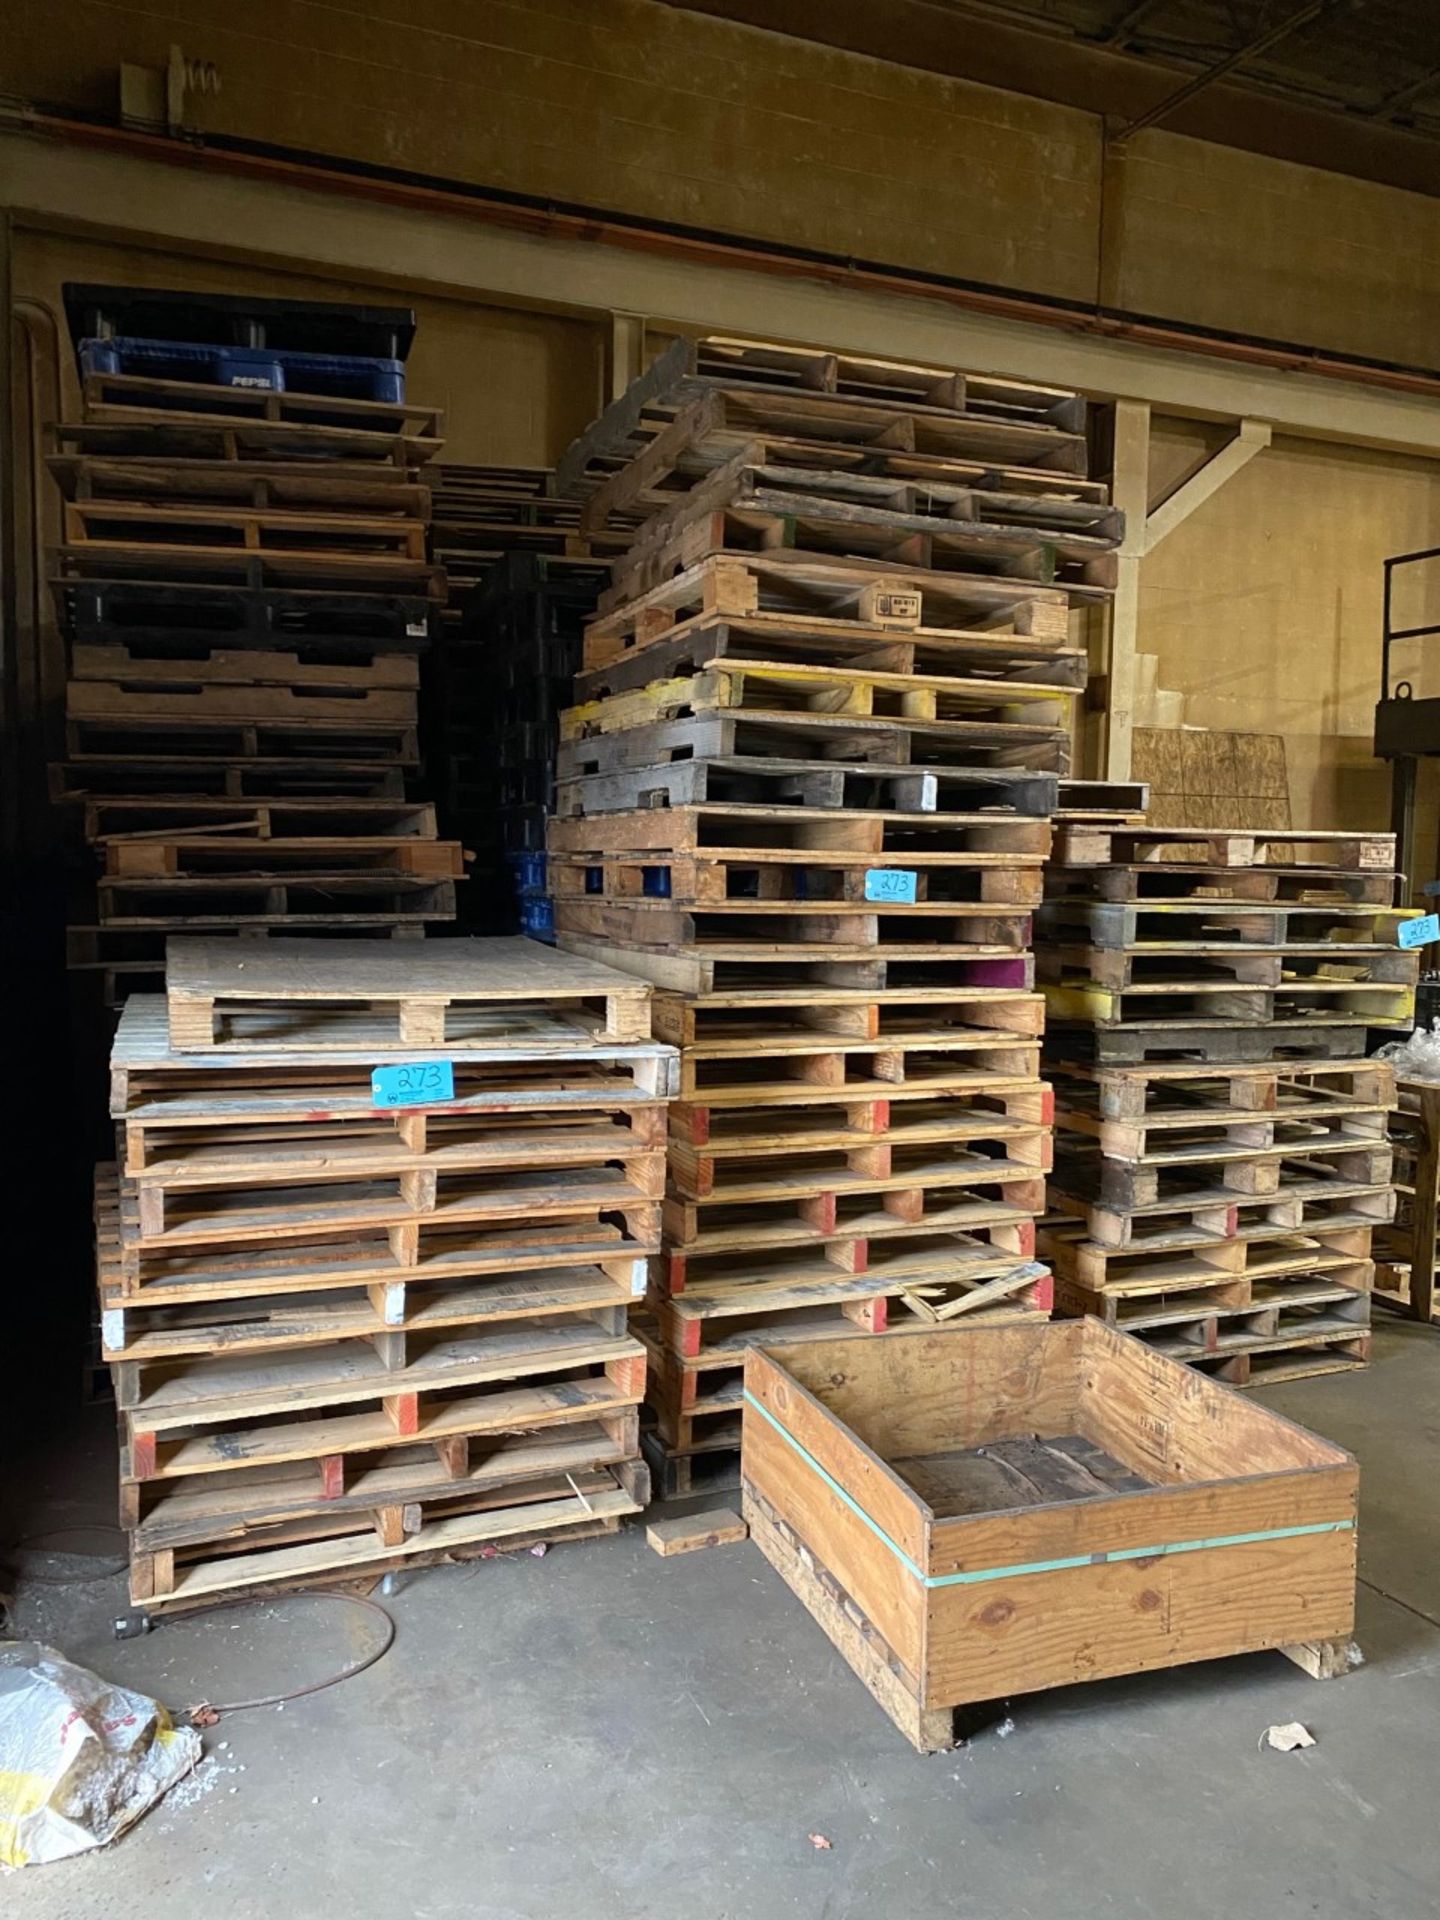 Lot-Approximately 180-200 Wood Pallets in (3) Rows, 40"-44" x 48" Approximate Dimensions - Image 2 of 5